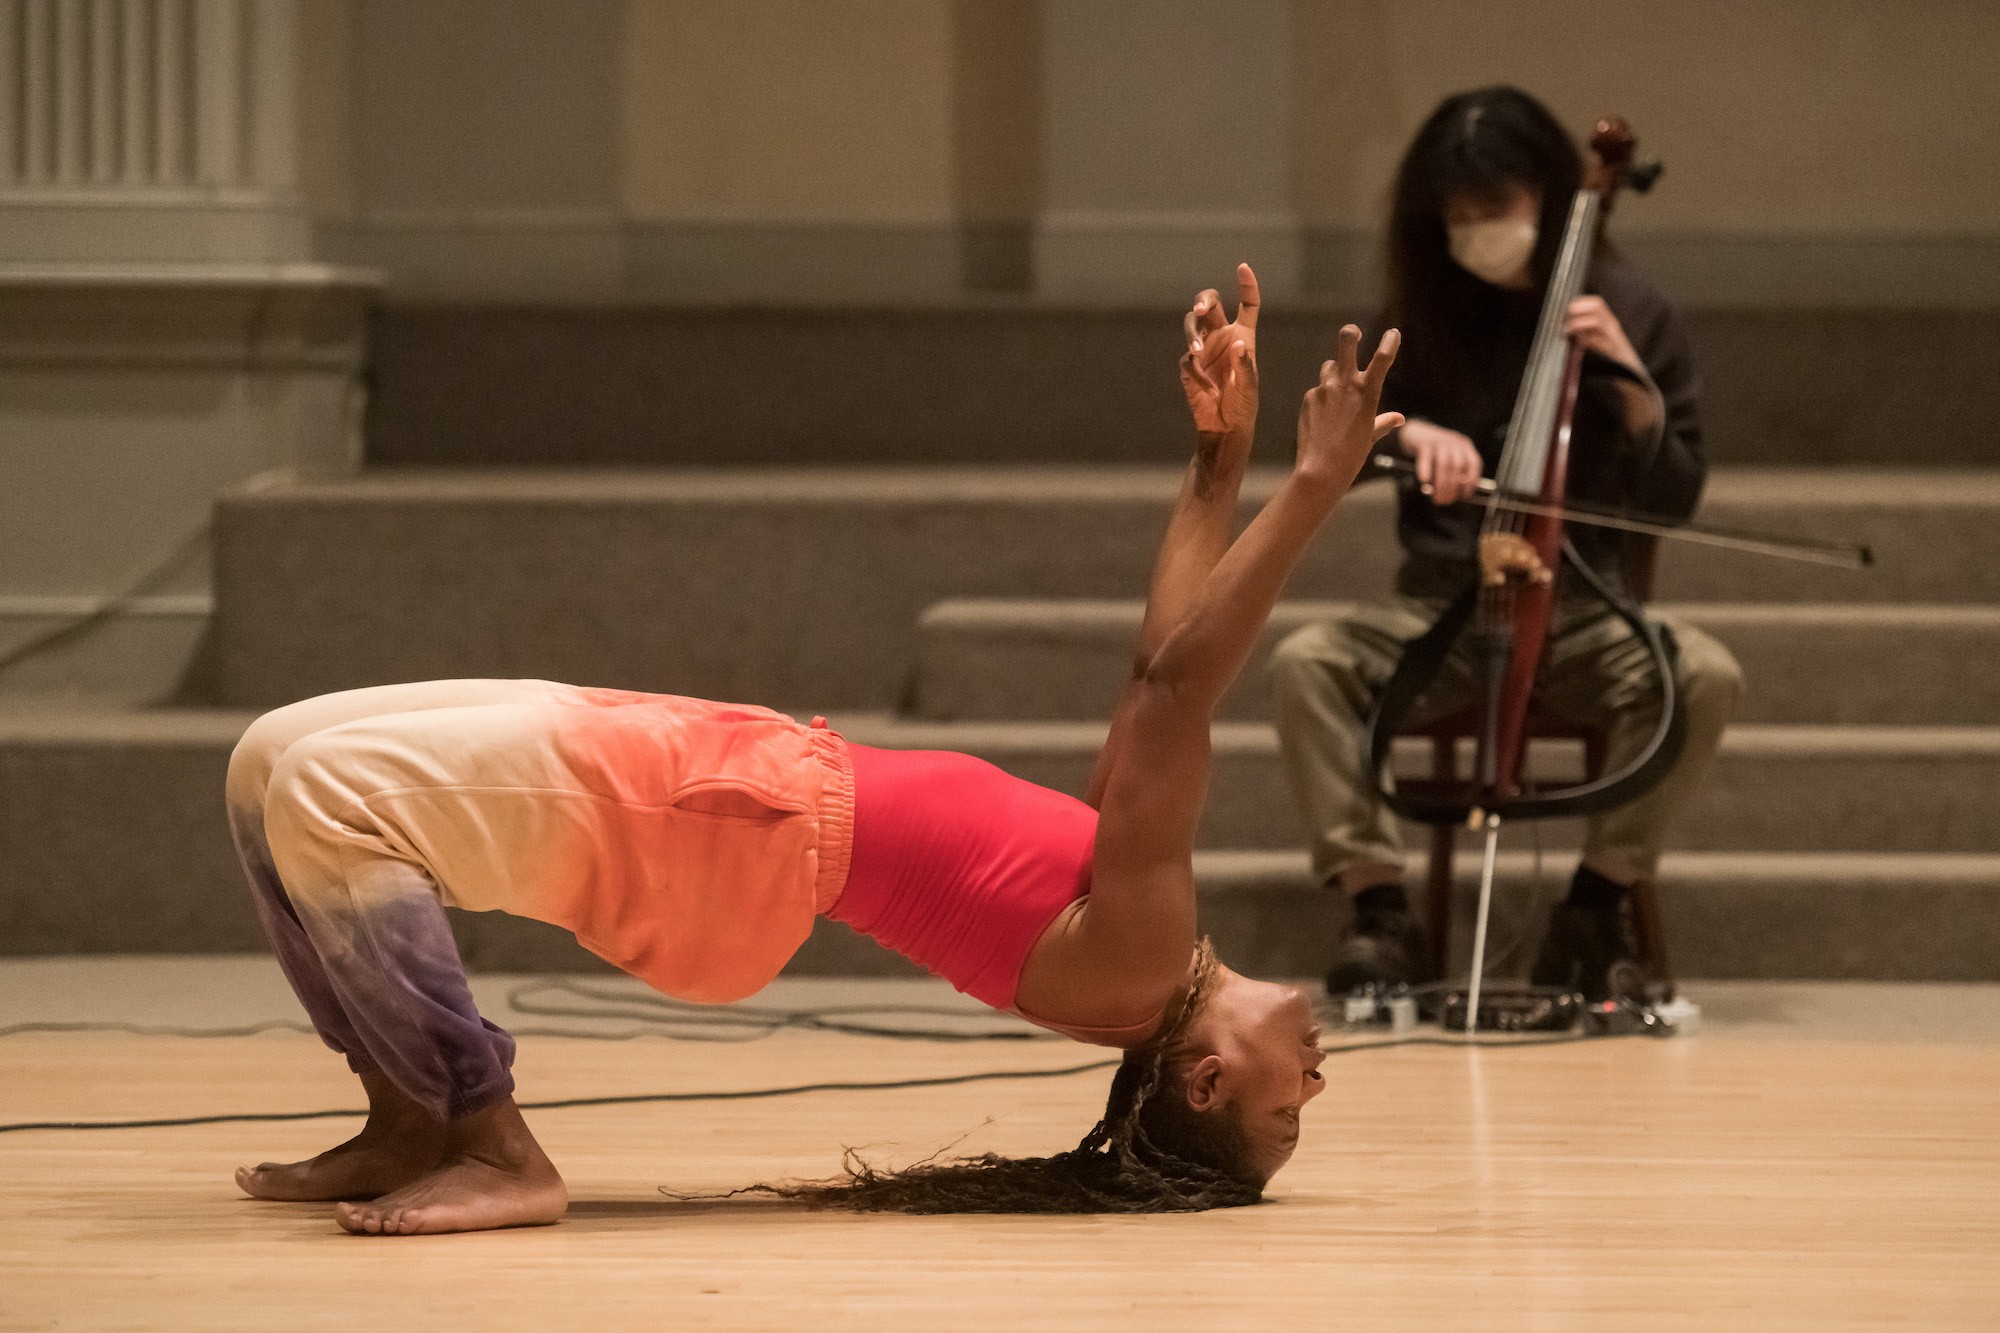 mayfield, a brown-skinned person with long brown braids, is in the foreground of the photo in a church with an altar and electronic cellist in the background. mayfield is in a backbend position with their head and bare feet touching the blonde wooden floor--arms stretched up towards the sky & wearing pink and purple sweats and a red  tank top. mayfield's fingers are curled & expressive. The cellist is blurred, wearing a black sweater, brown pants, and black boots.  The carpet on the stairs of the altar behind the cellist is a tan color. The cellist, named Dorothy, is sitting on a chair in front of the church altar stairs & is a light brown skinned person with long hair and bangs wearing a white mask & playing their electric cello with cables attached to it.